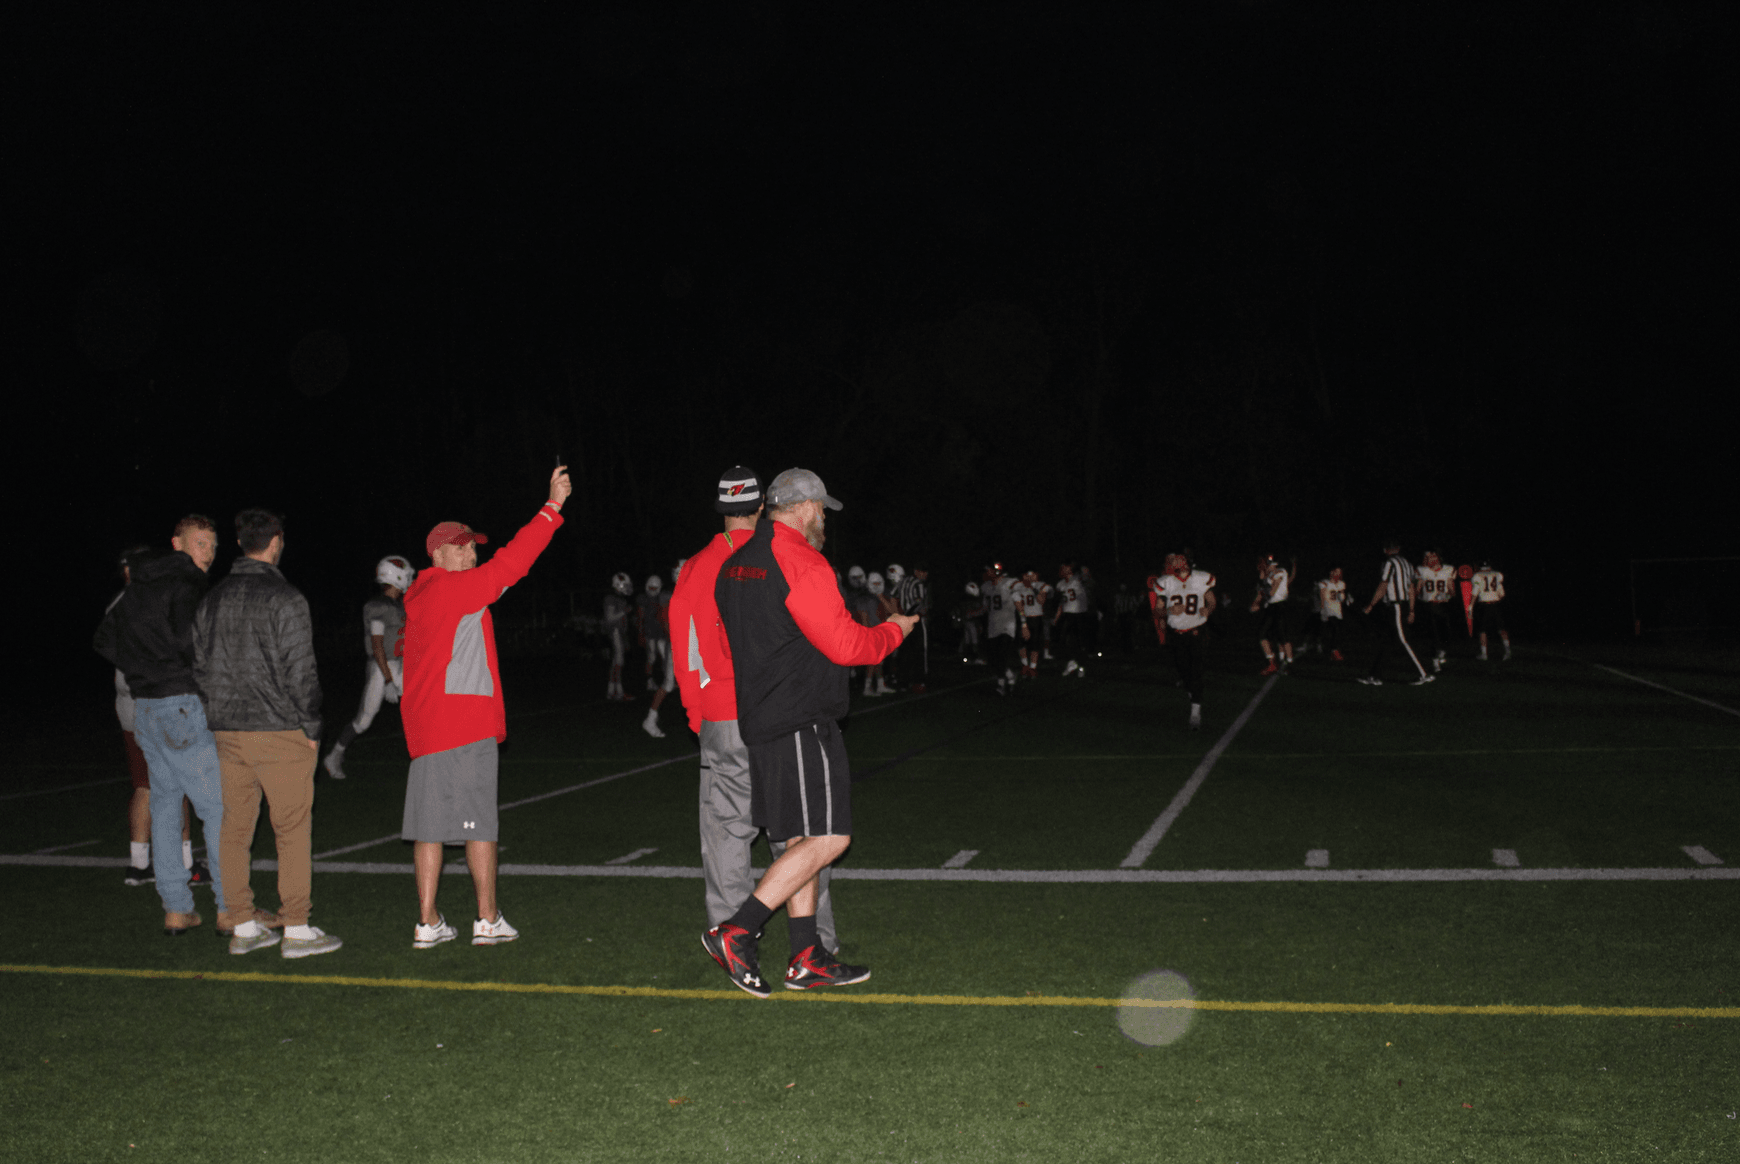 The JV football game versus Ridgefield completed on field 7 with no lights, close to 5:30pm on Nov 6, 2017 Photo: Leslie Yager